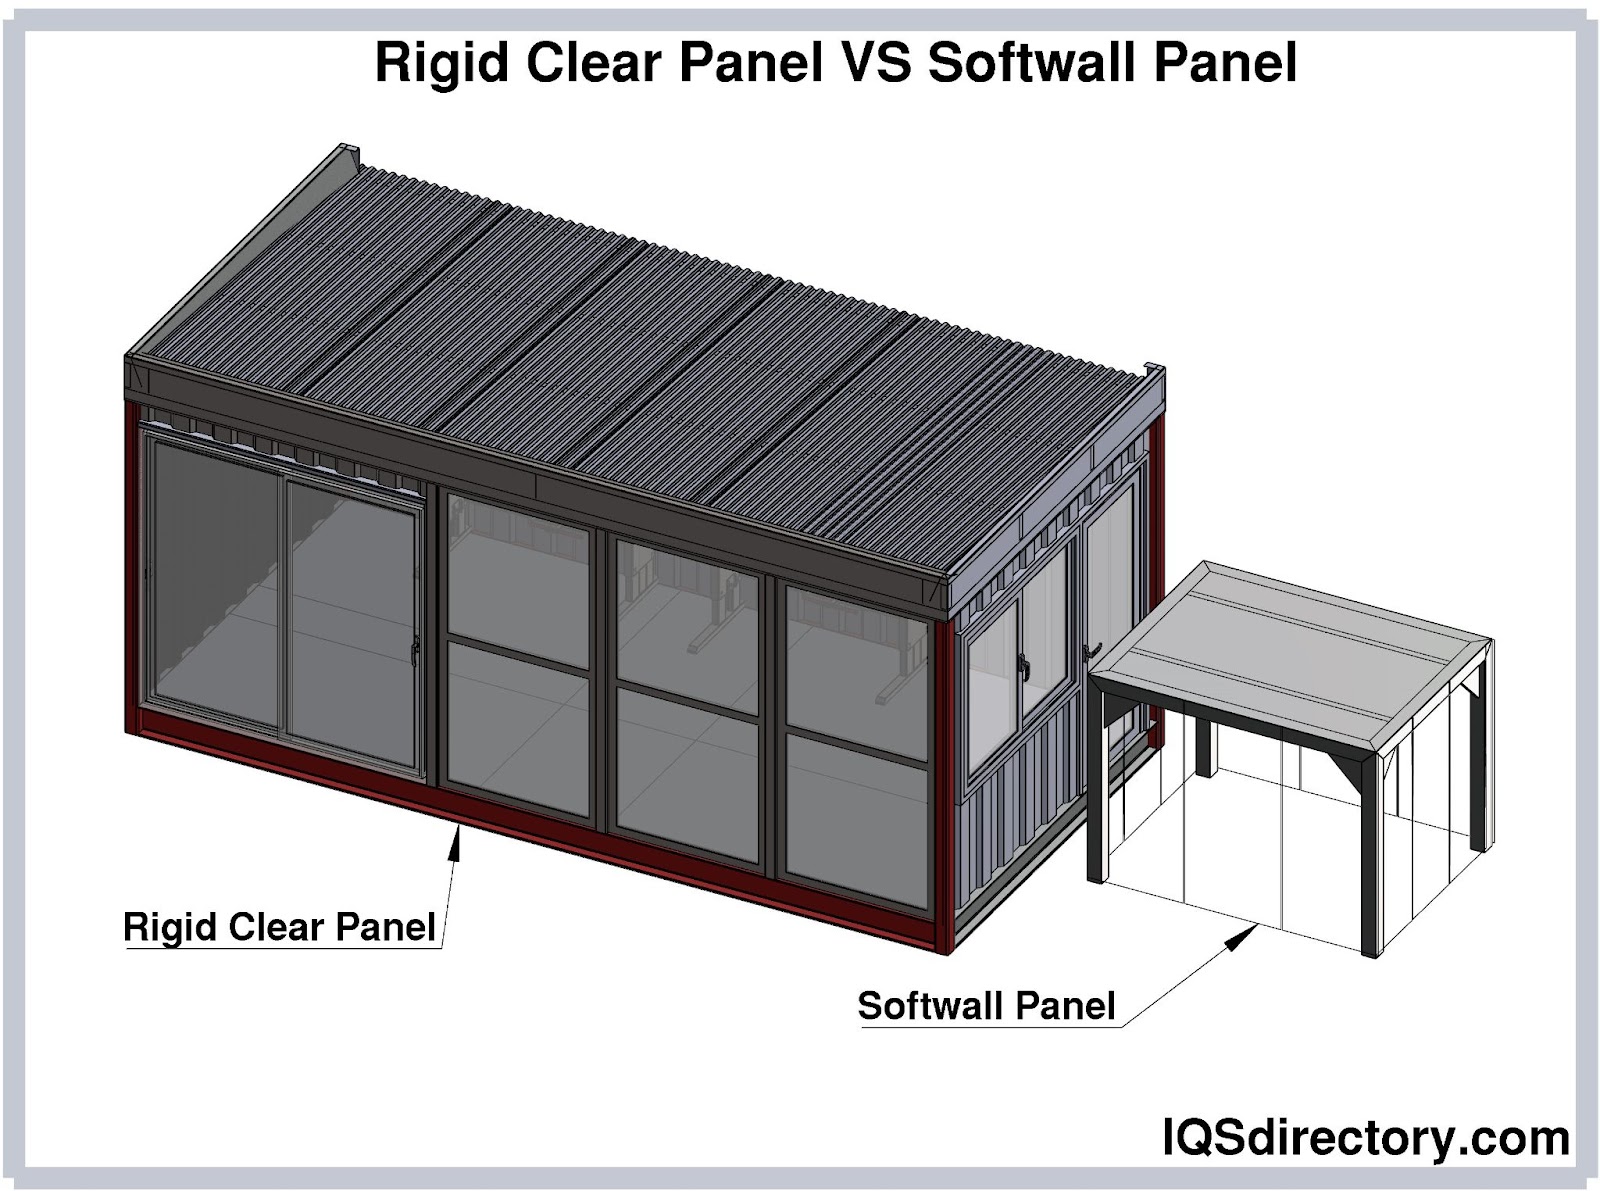 Rigid Clear Panel vs Softwall Panel